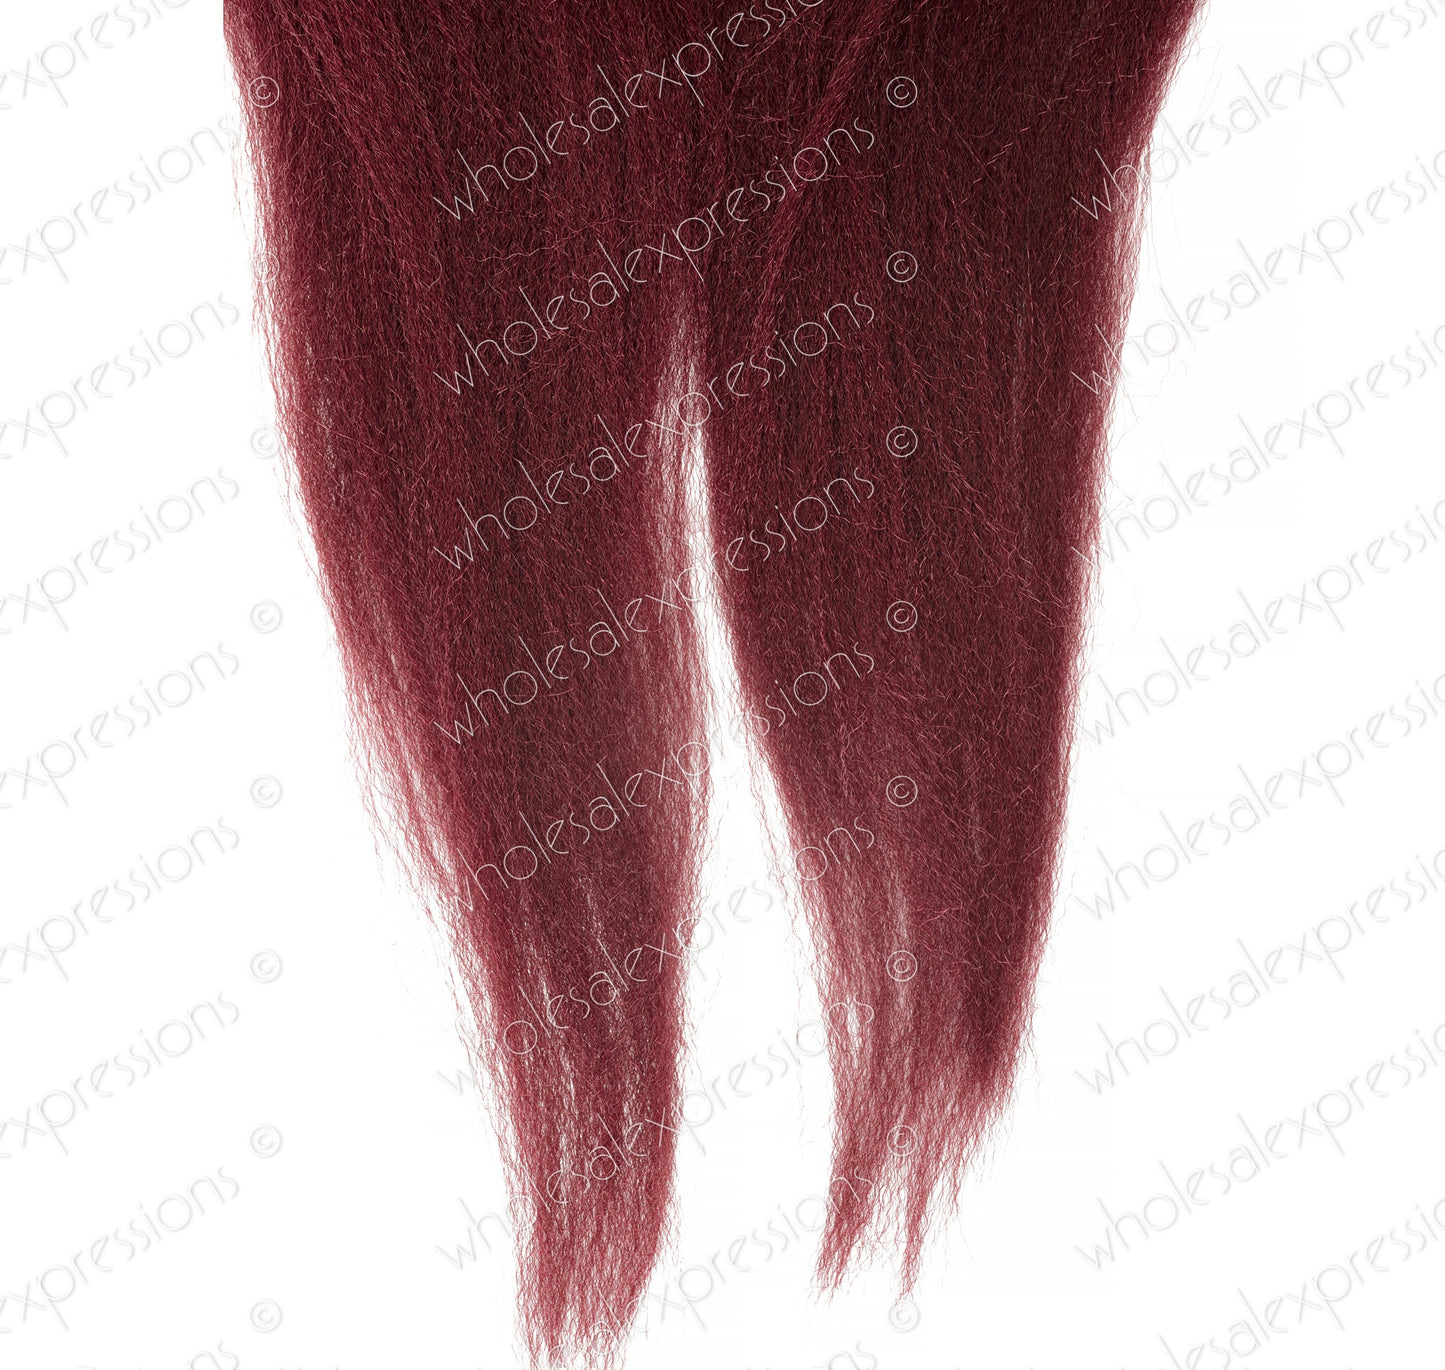 Xpression braiding hair, colour 39, 60 inch, pre-stretched  which is a burgundy/wine red